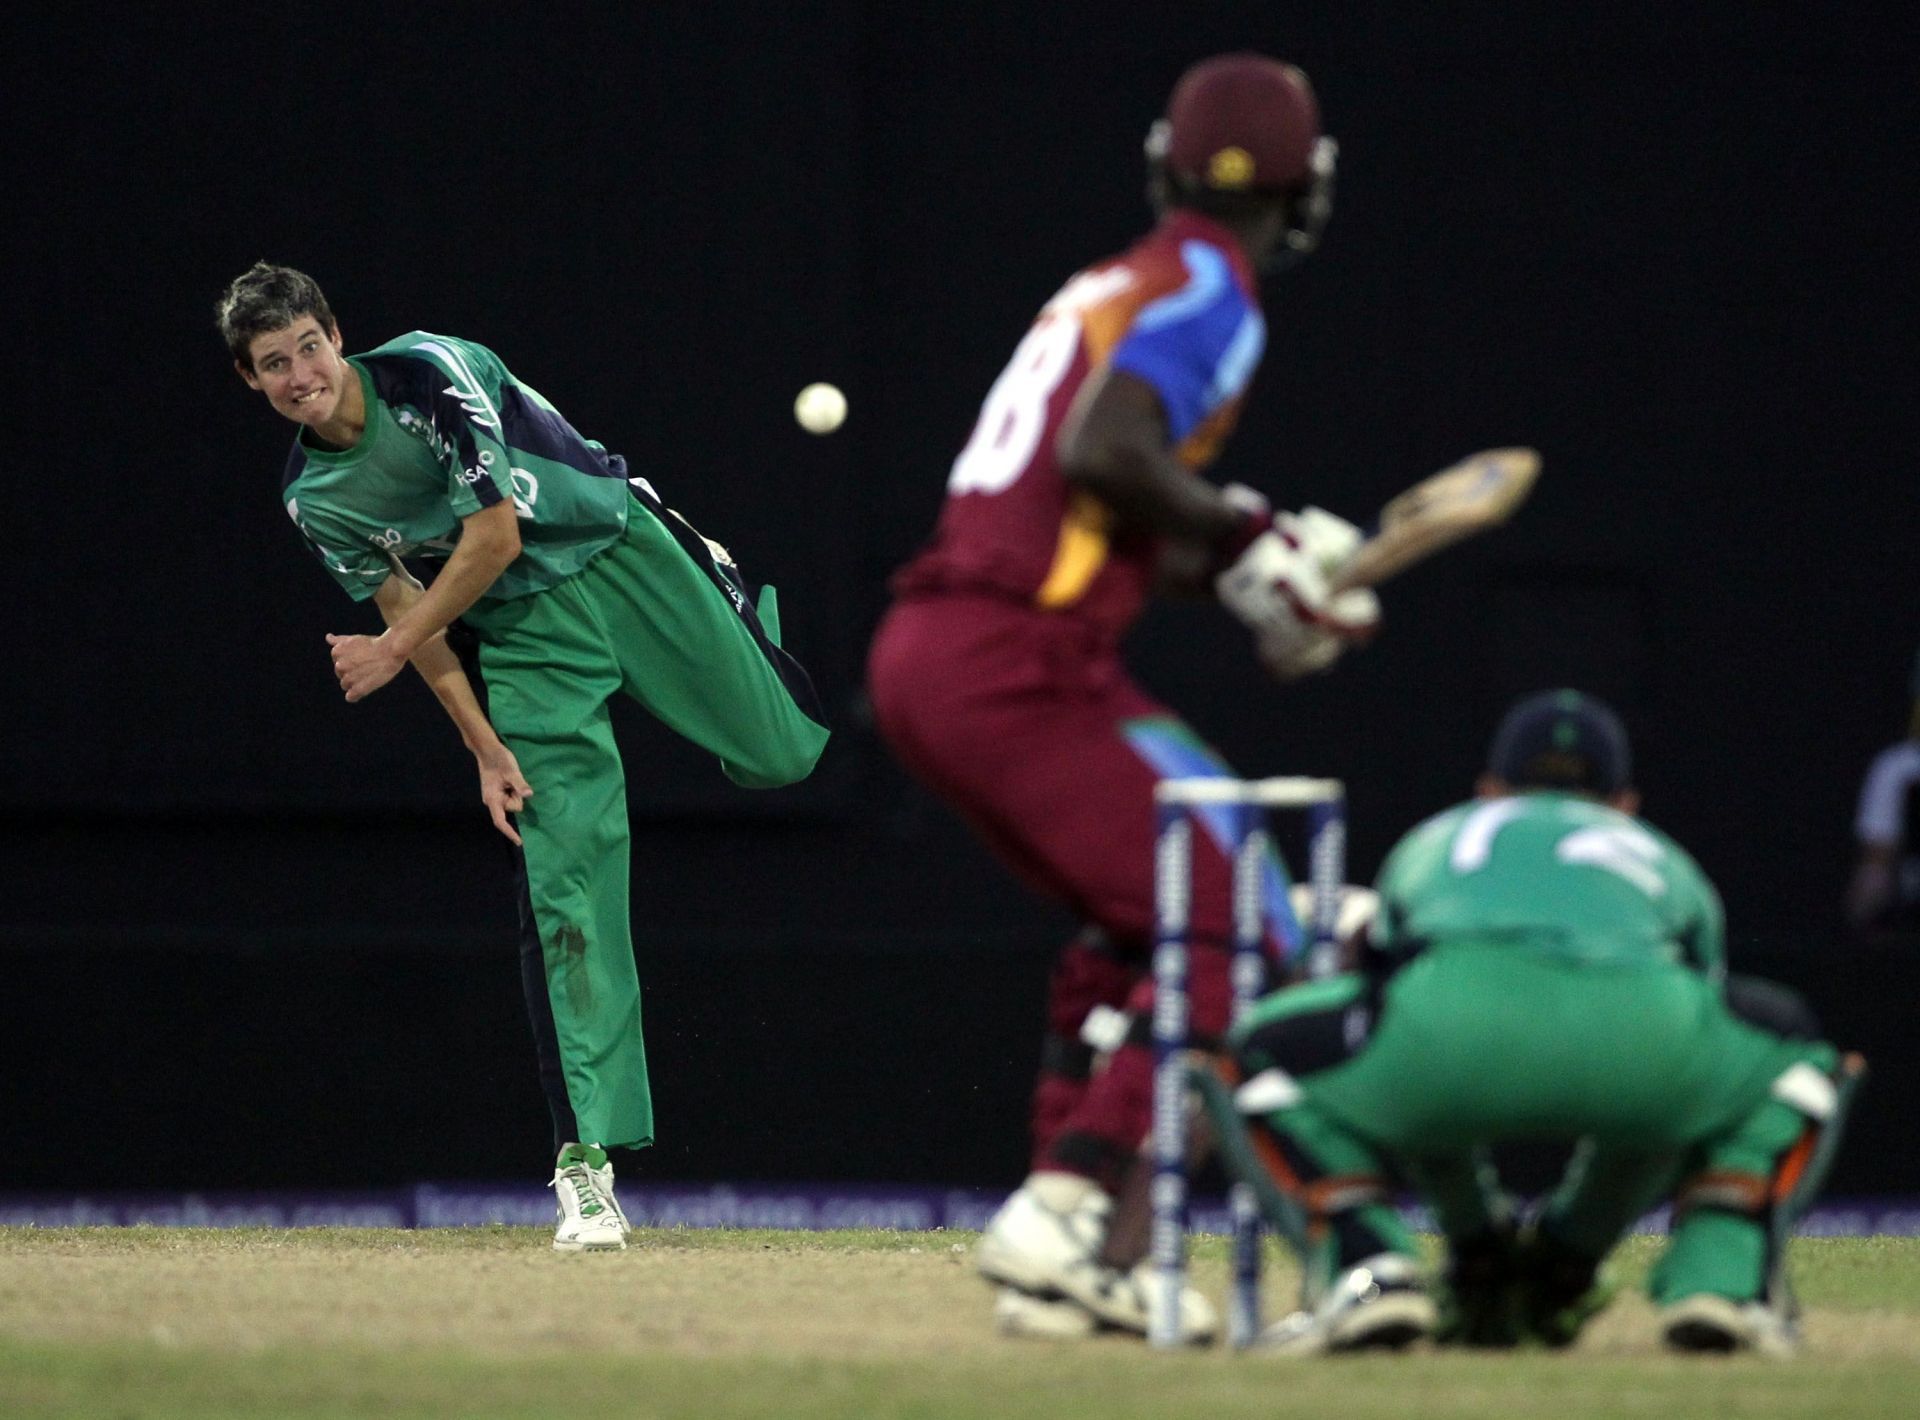 George Dockrell took a three-wicket haul on his T20 World Cup debut (Image: Getty)